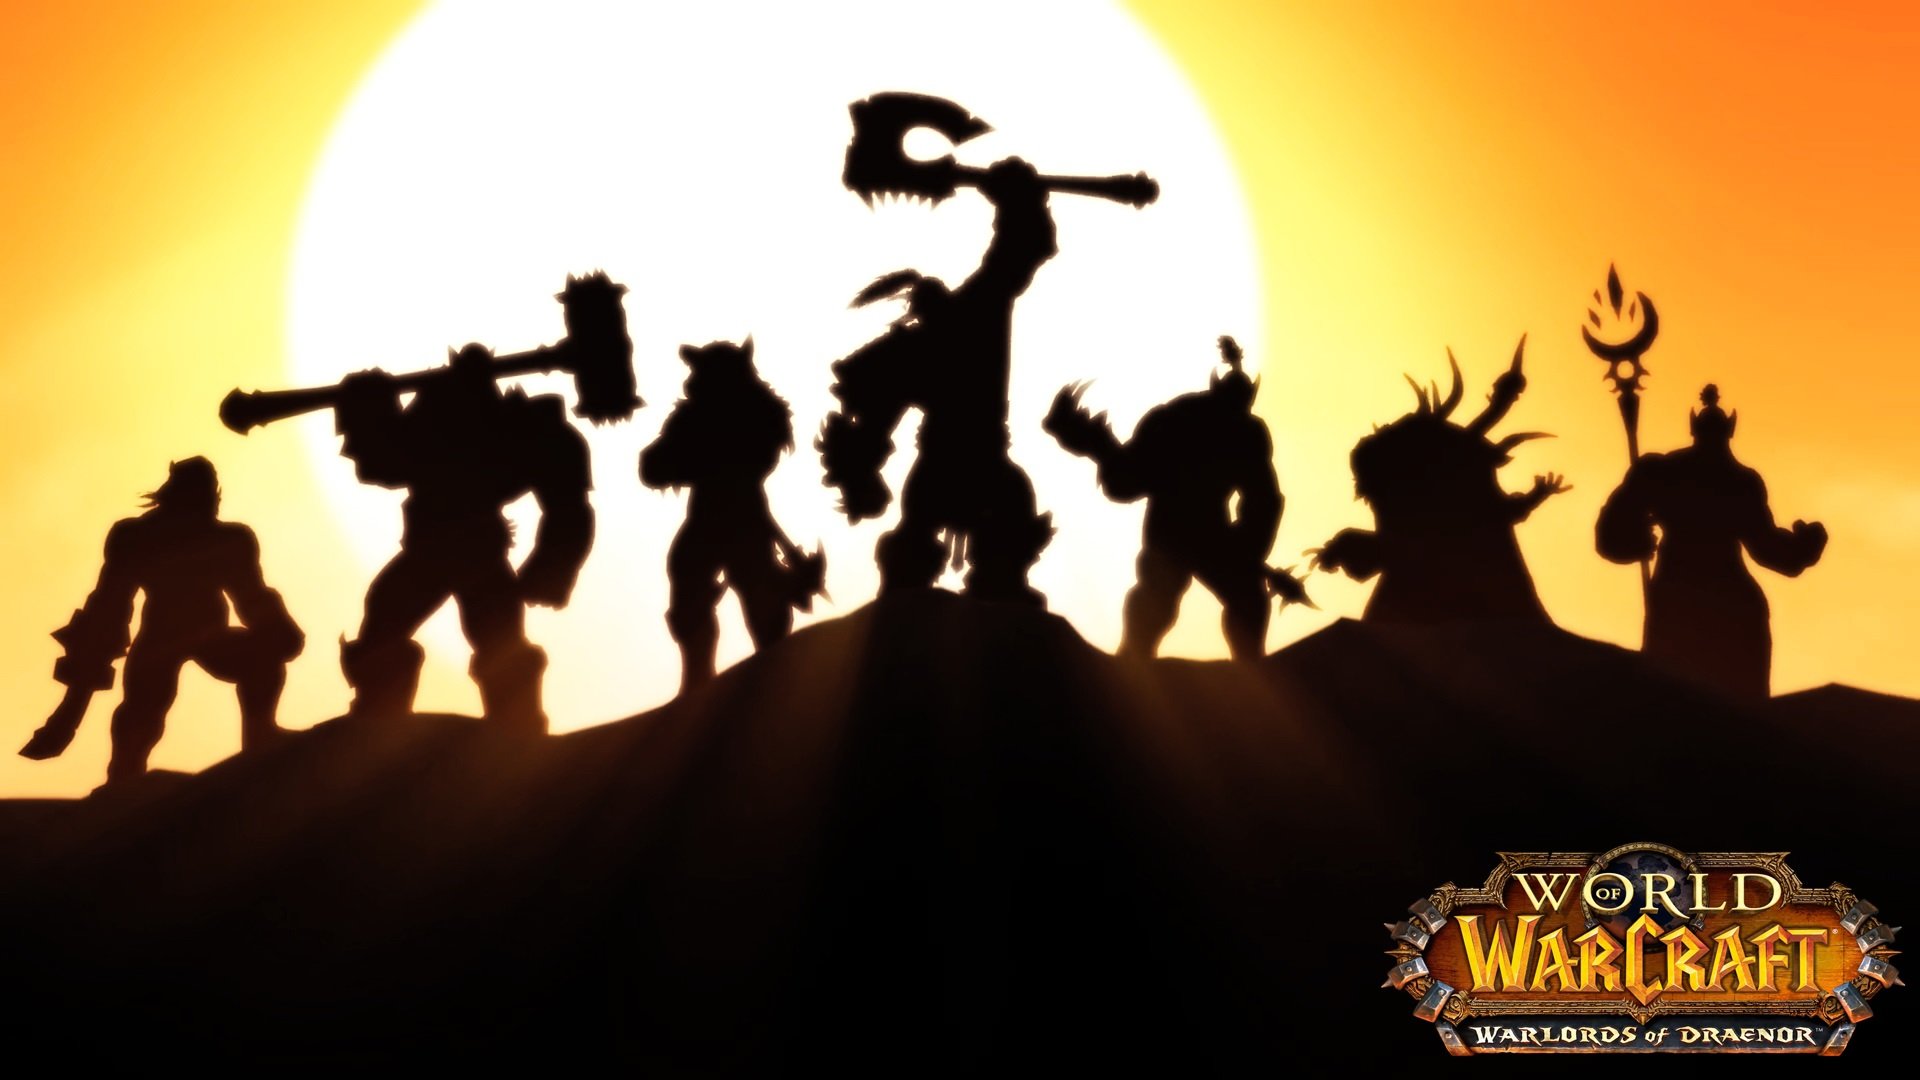 Best World Of Warcraft: Warlords Of Draenor wallpaper ID:442221 for High Resolution 1080p computer